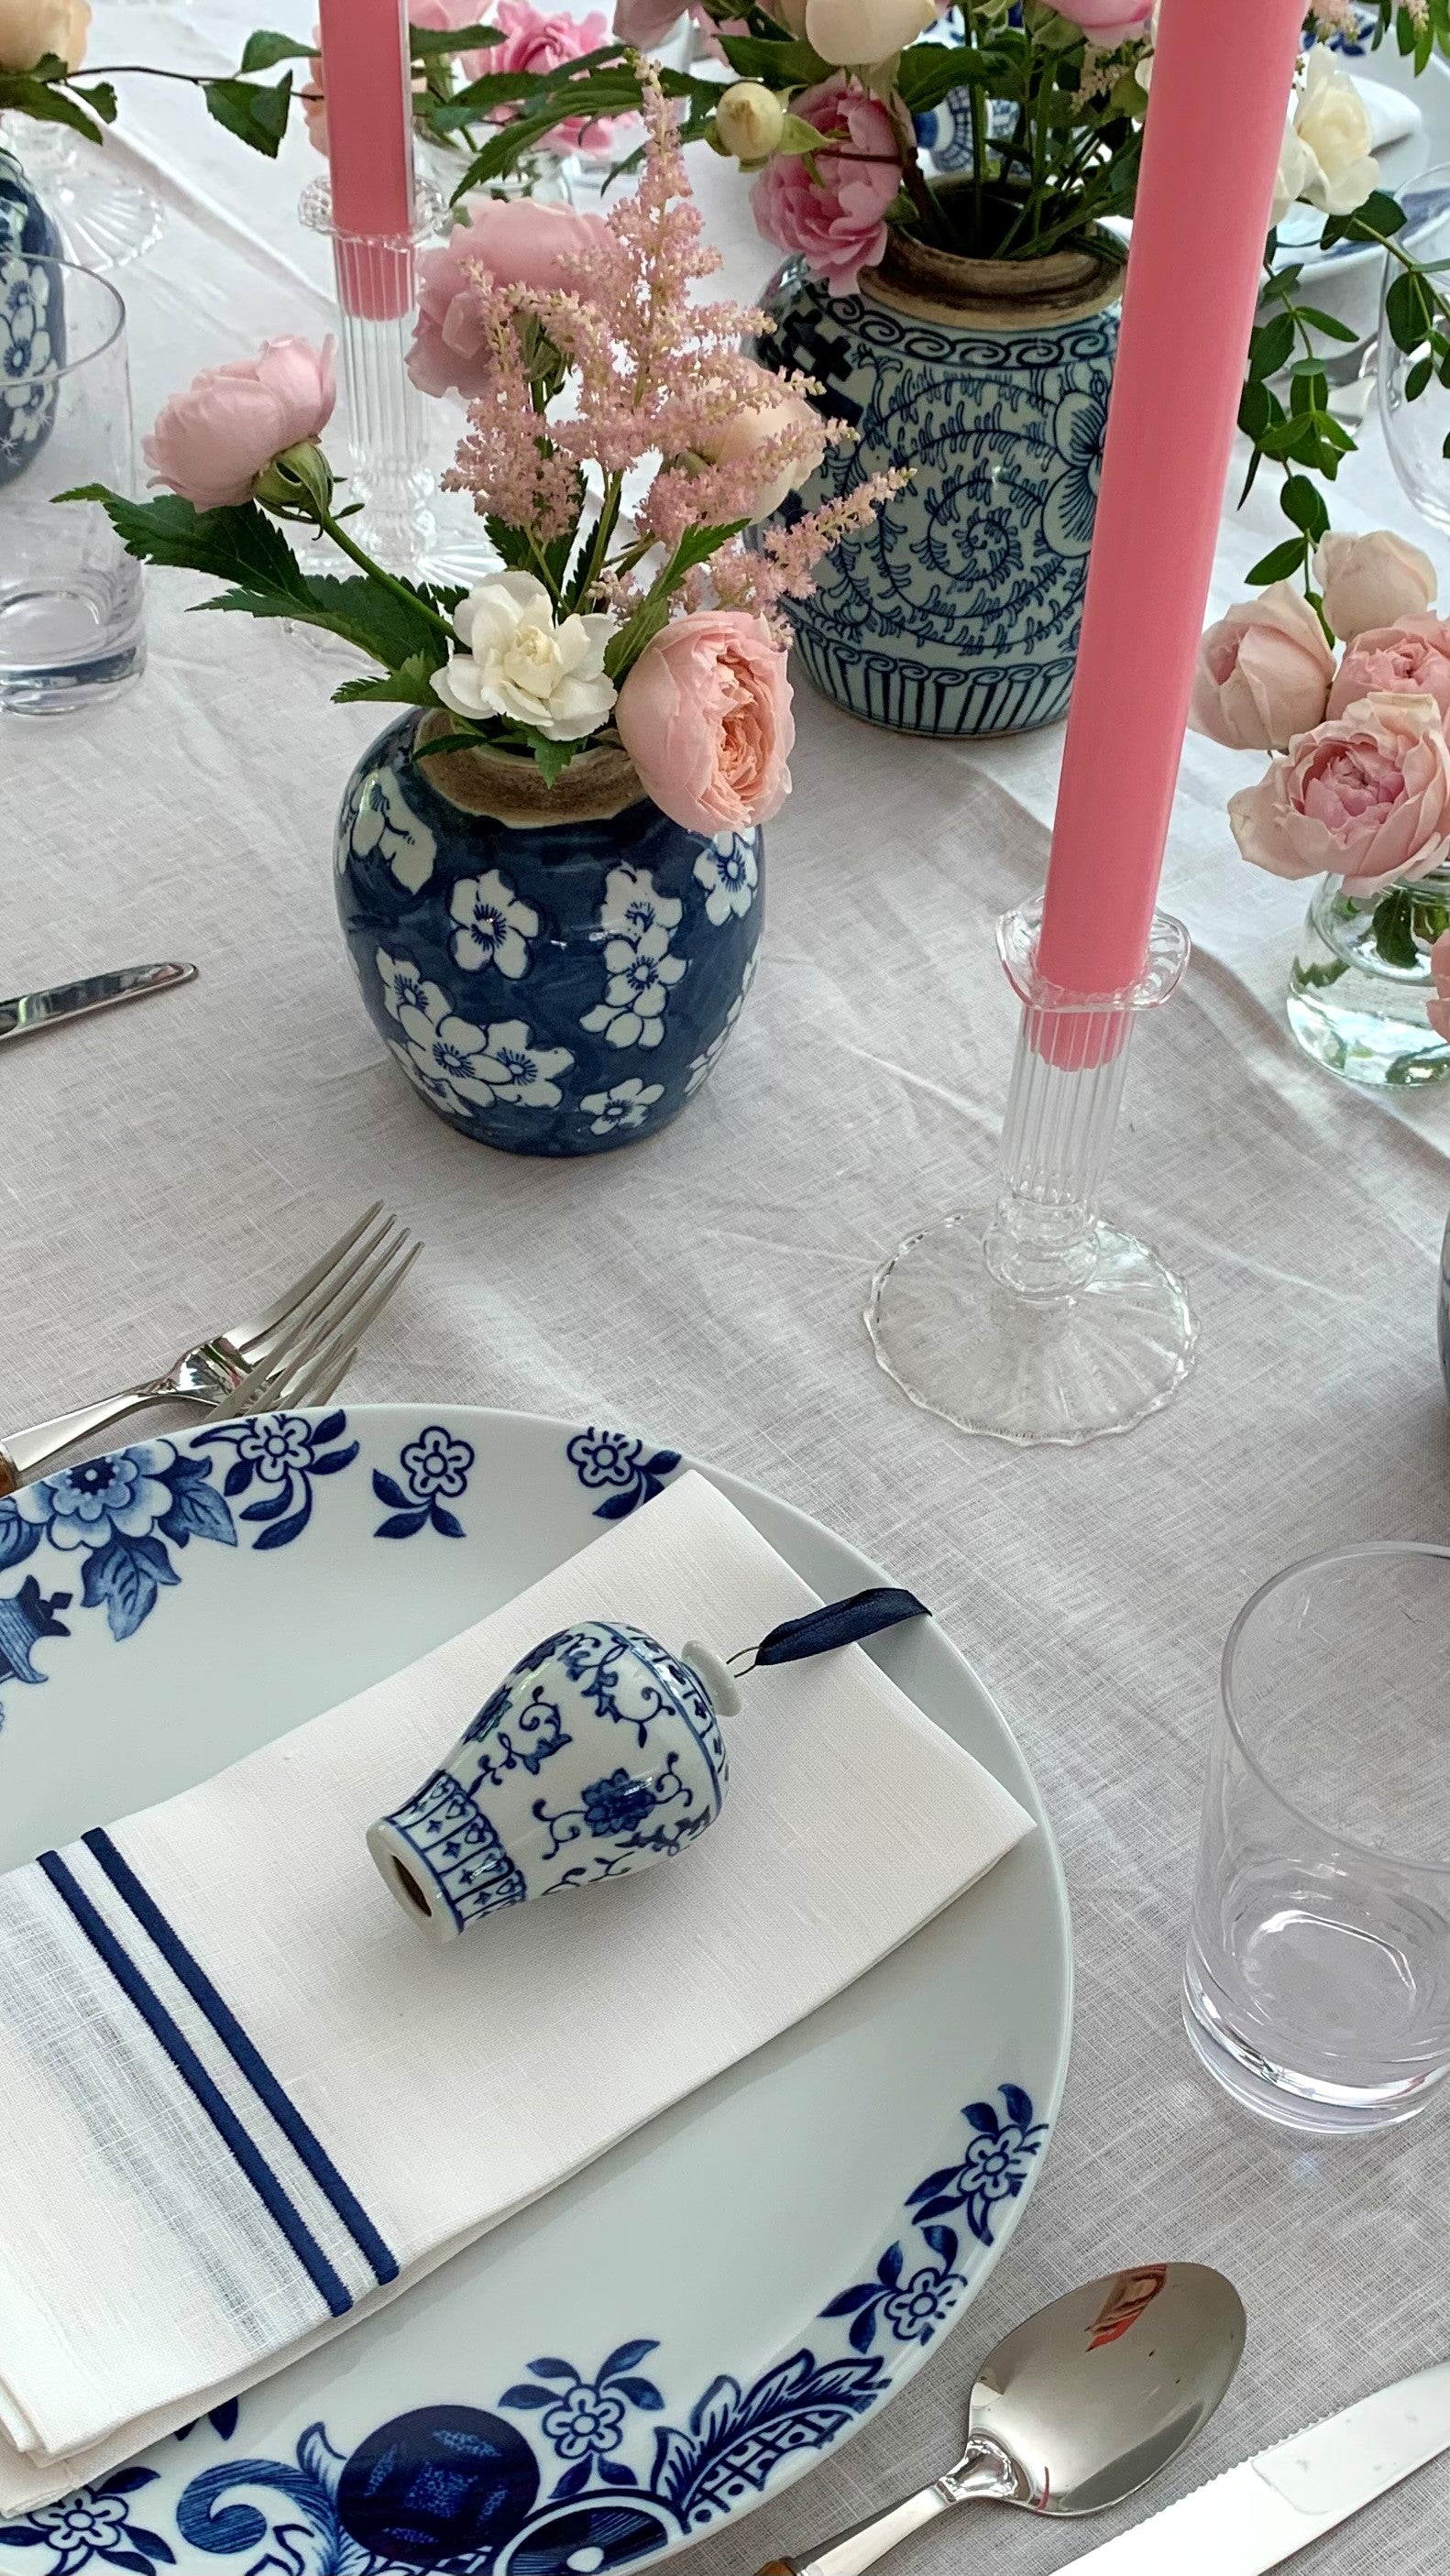 A blue and white tablescape with ginger jars filled with flowers and cherry blossom candles in clear candle holders.